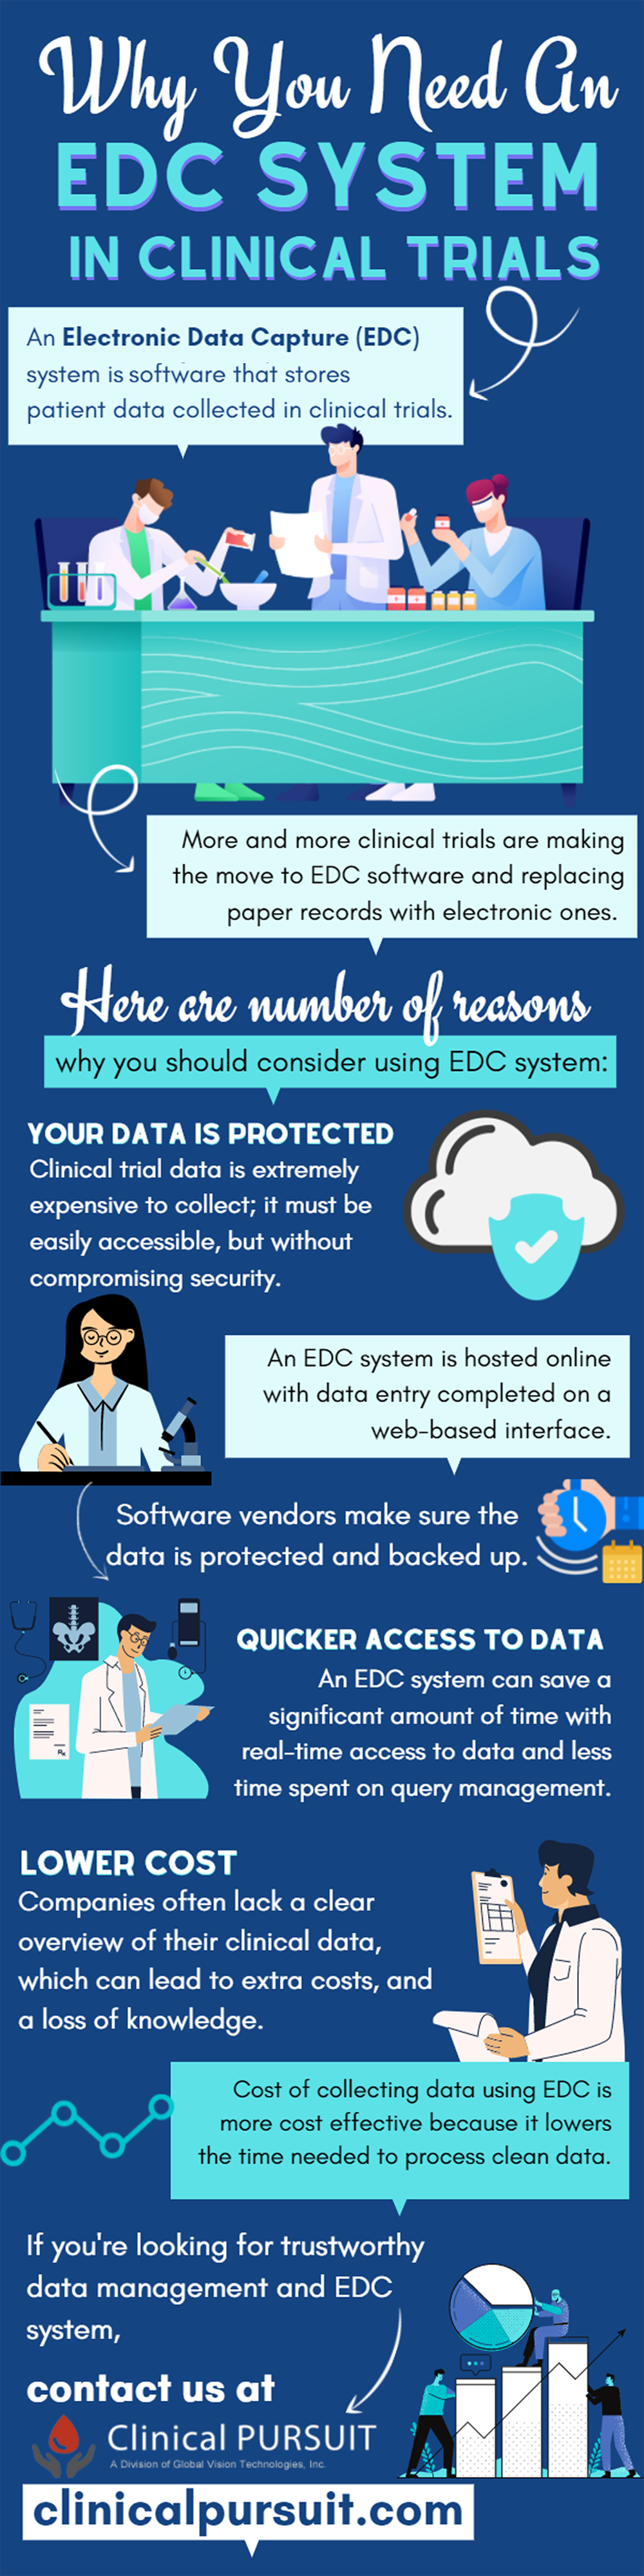 Infographic detailing why and EDC system is important in clinical trials